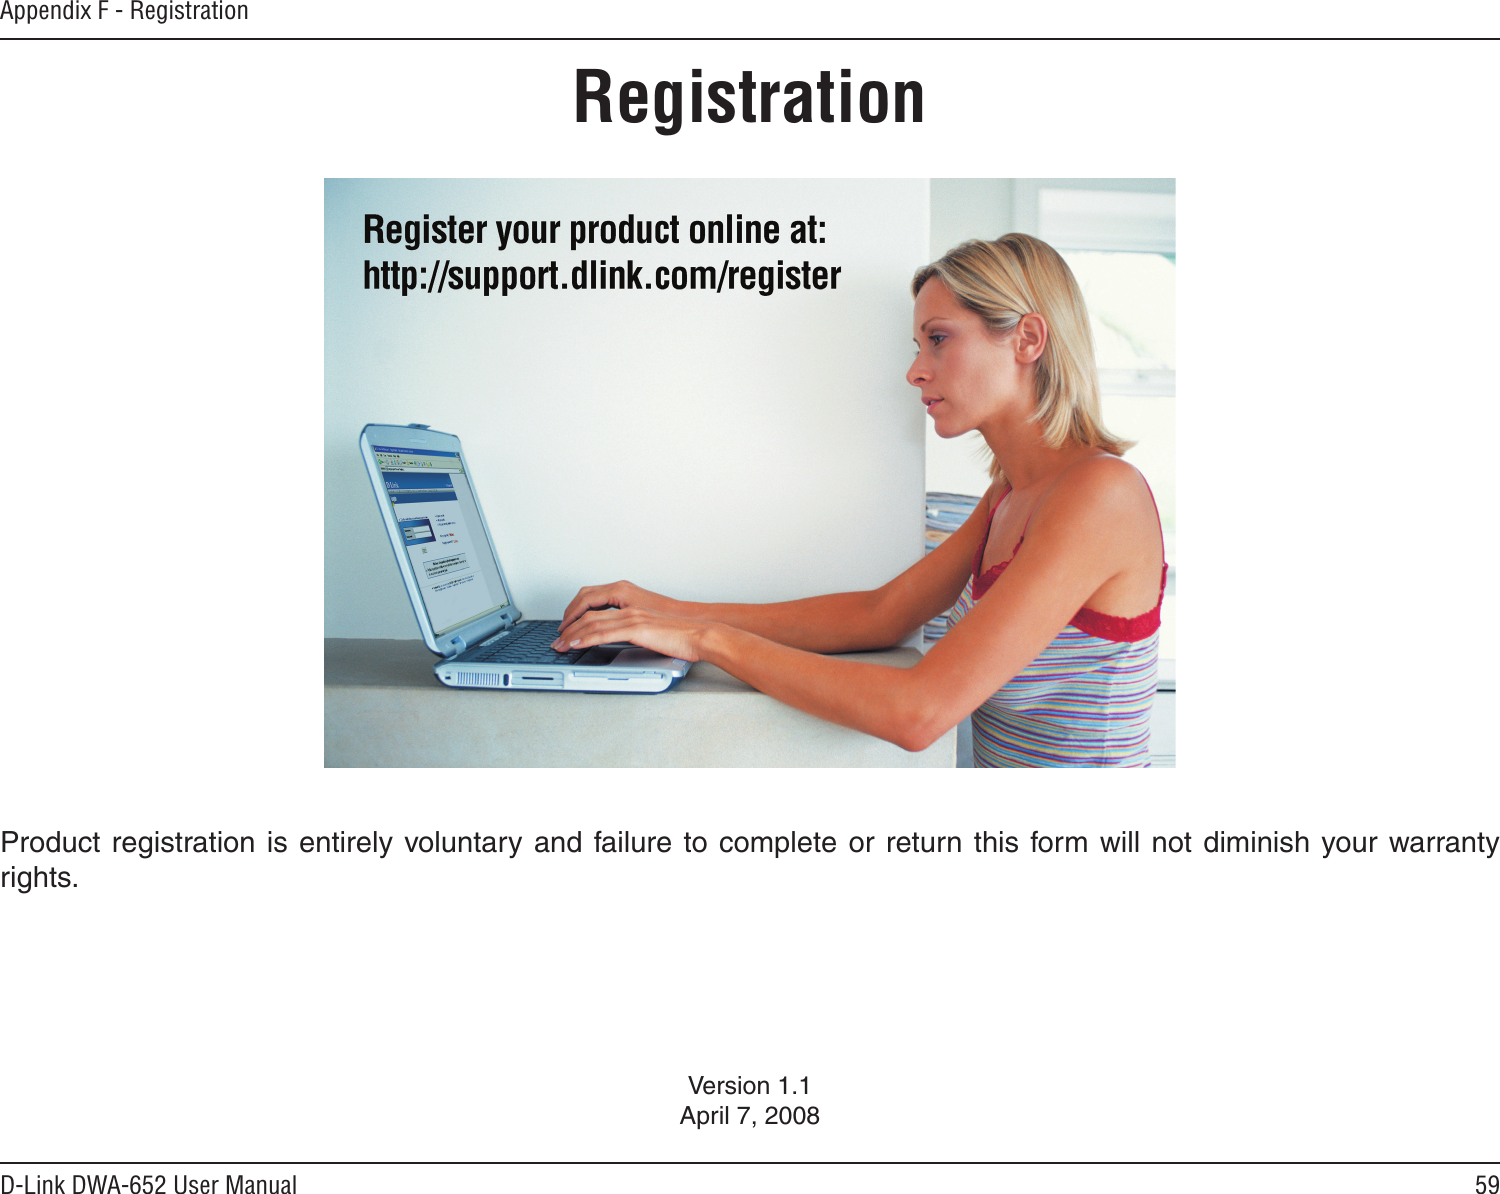 59D-Link DWA-652 User ManualAppendix F - RegistrationVersion 1.1April 7, 2008Product registration is entirely voluntary and failure to complete or return  this form will not diminish your warranty rights.Registration